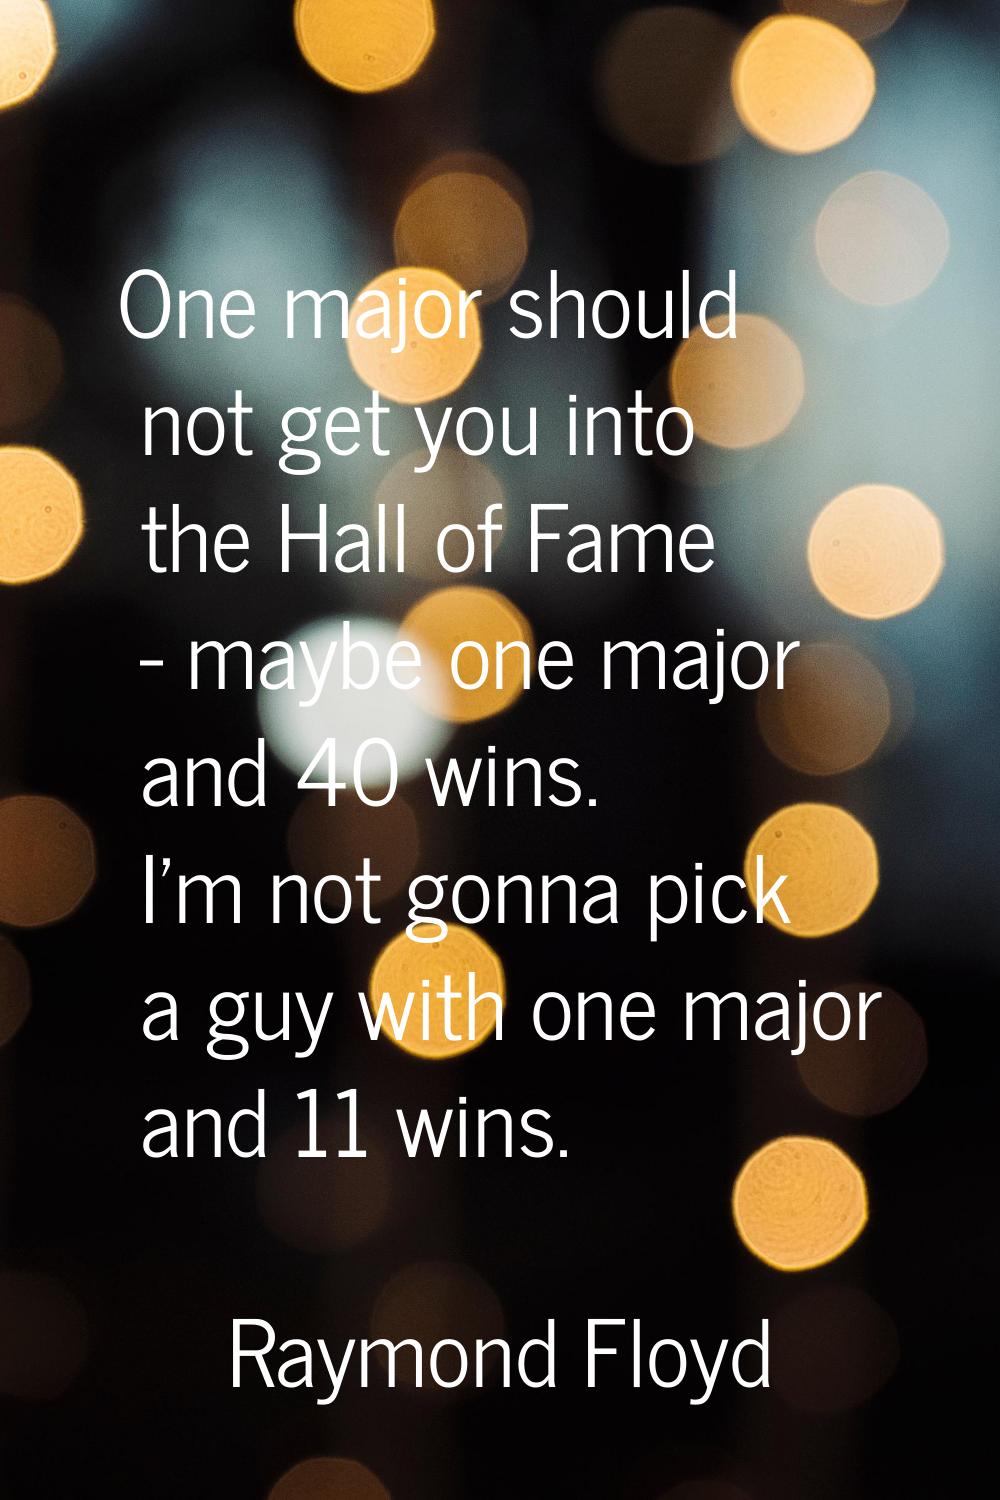 One major should not get you into the Hall of Fame - maybe one major and 40 wins. I'm not gonna pic